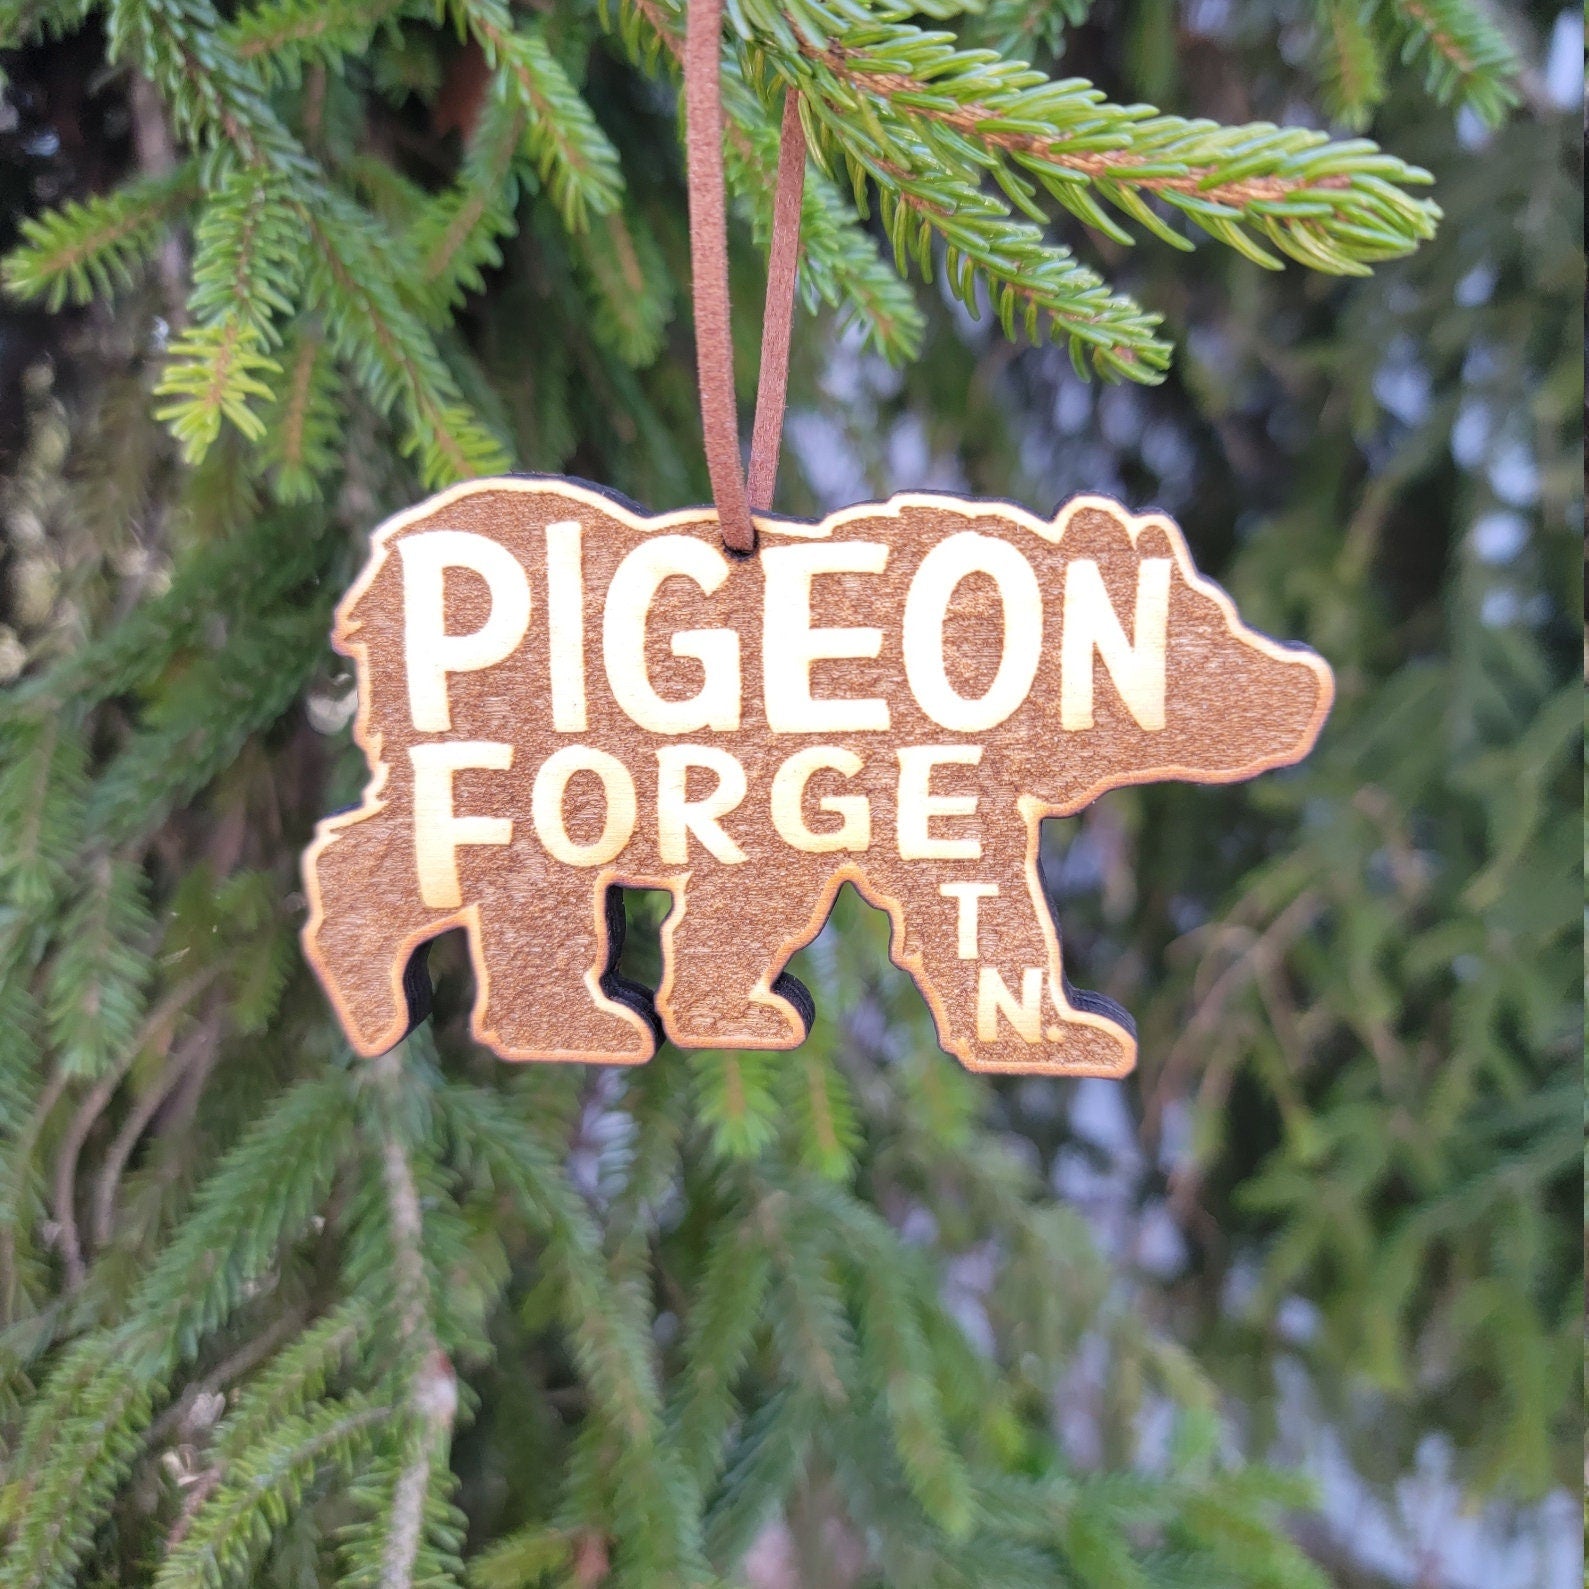 Wood Pigeon Forge Tennessee Christmas Ornament Bear Great Smoky Mountains National Park 3.8" TN